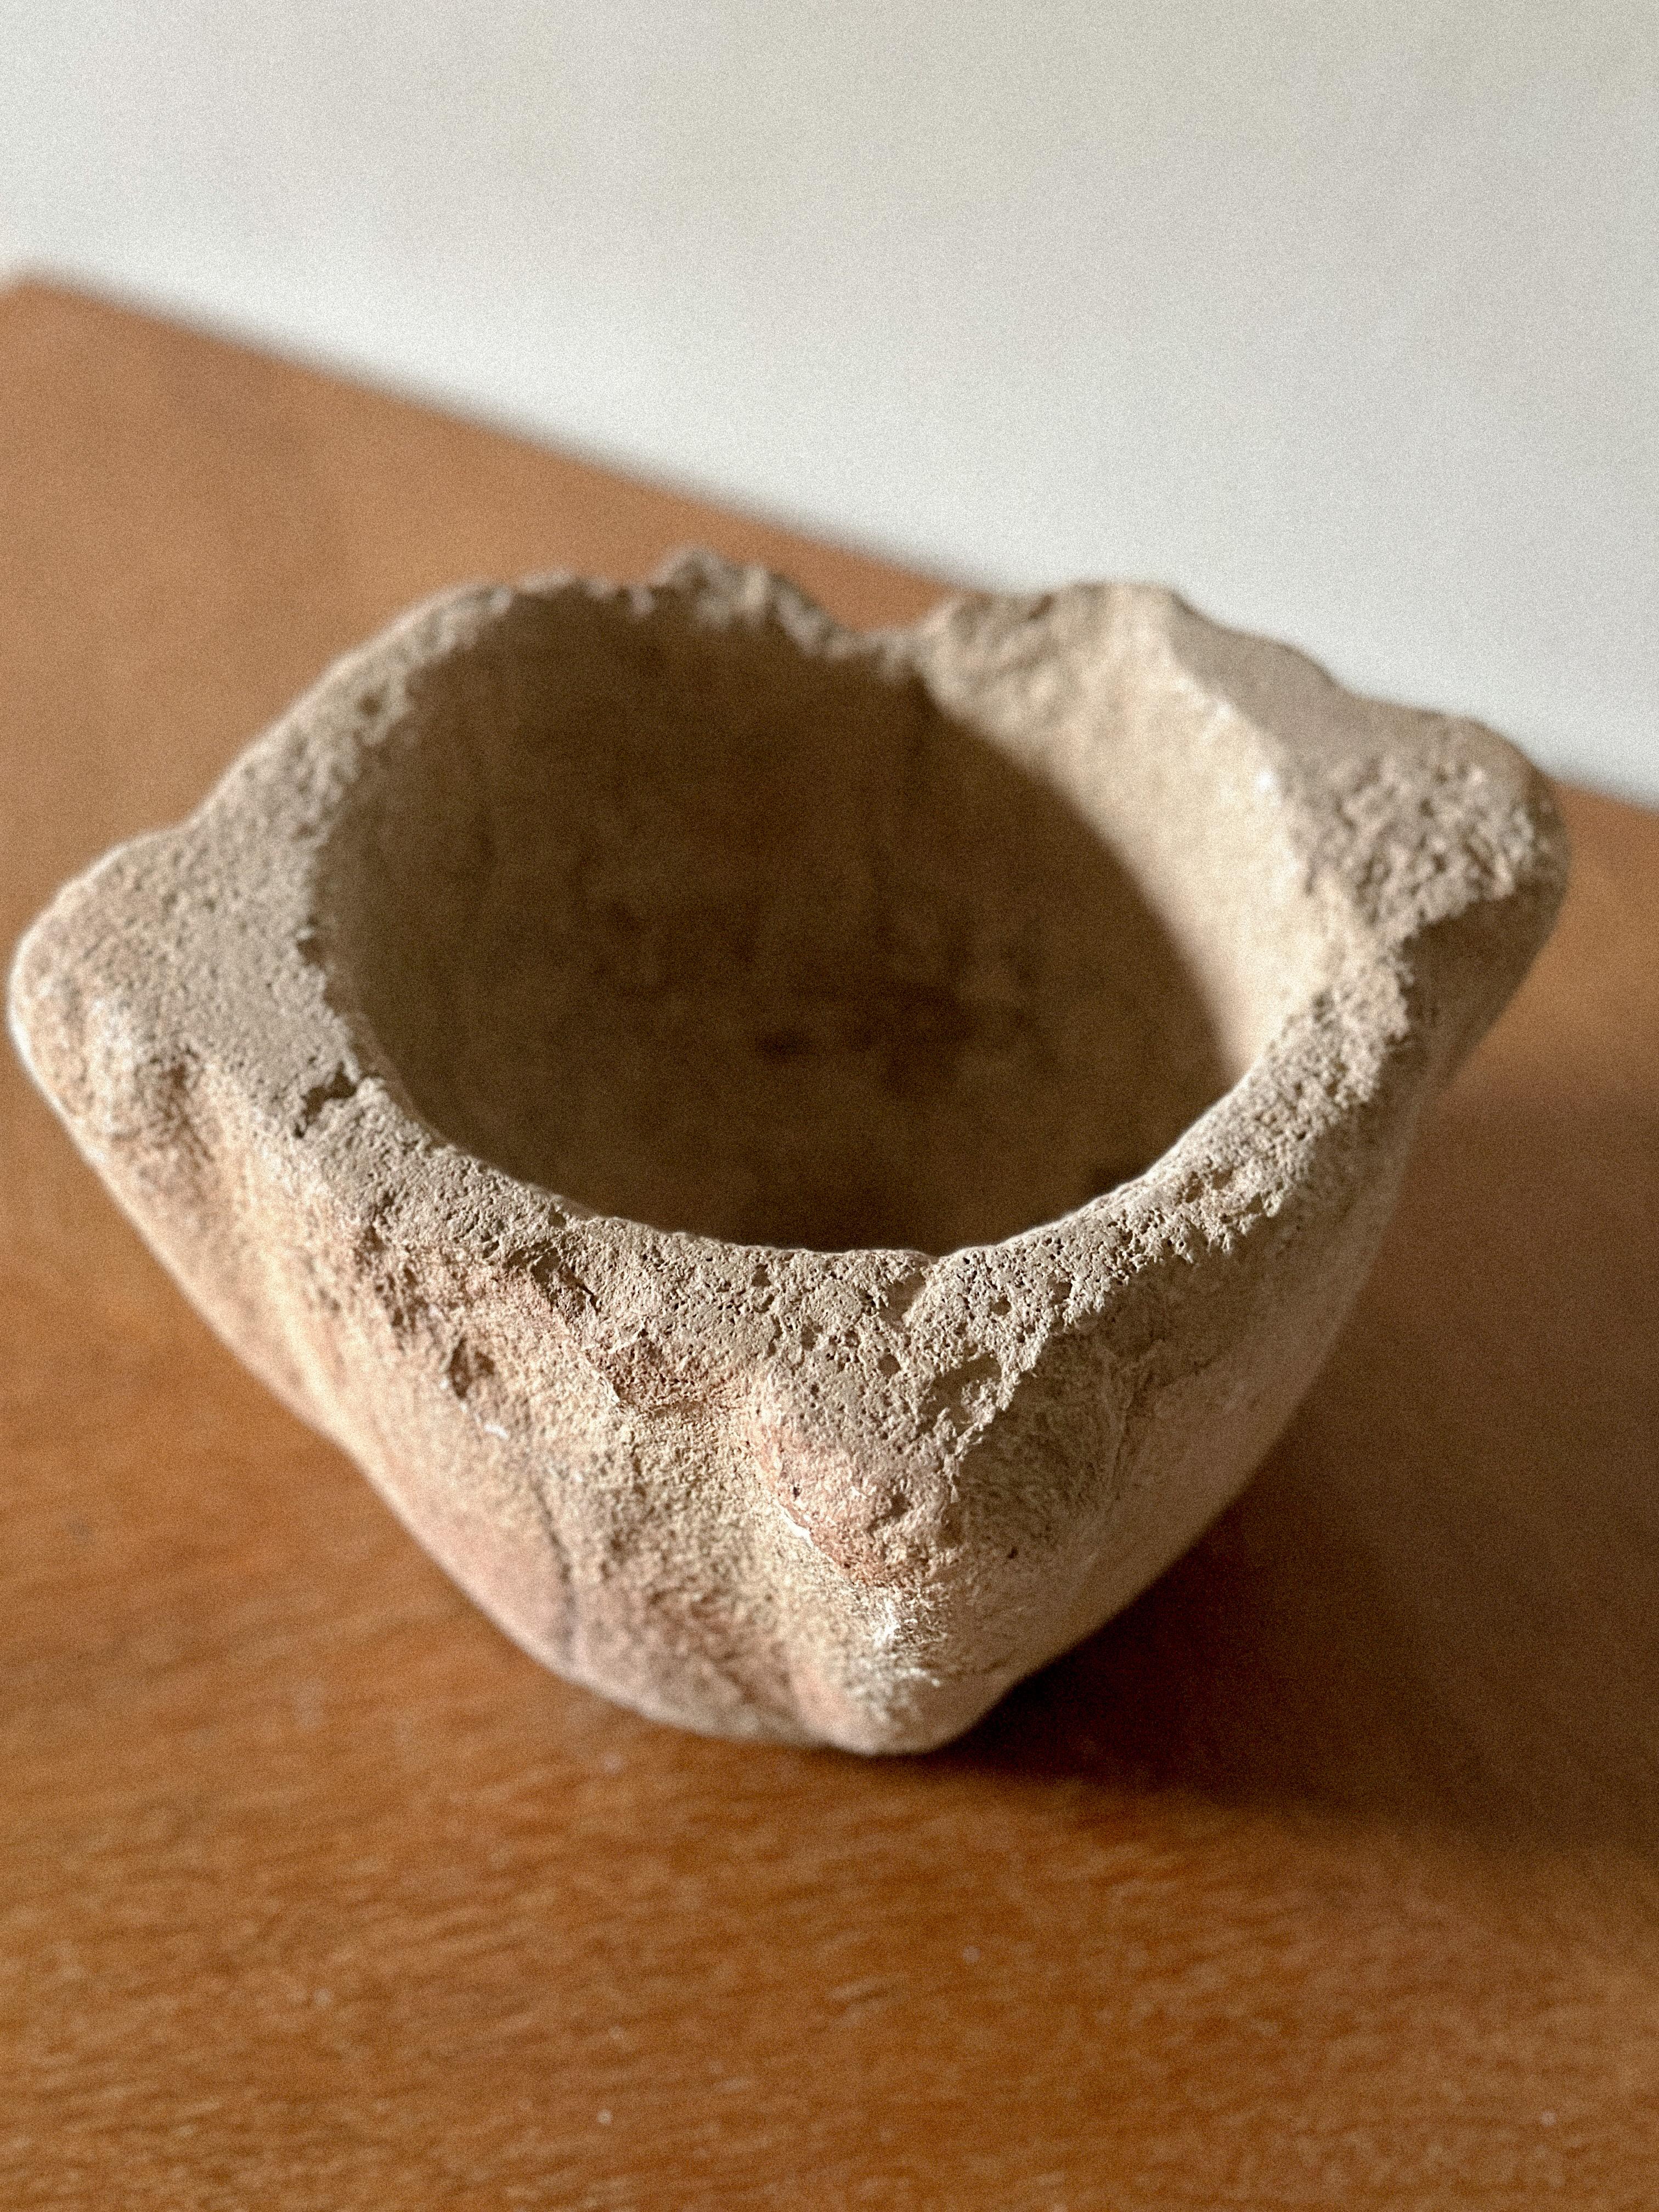 A Primitive Wabi Sabi Hand-Carved Stone Mortar, Spain, Early 20th Century   For Sale 3